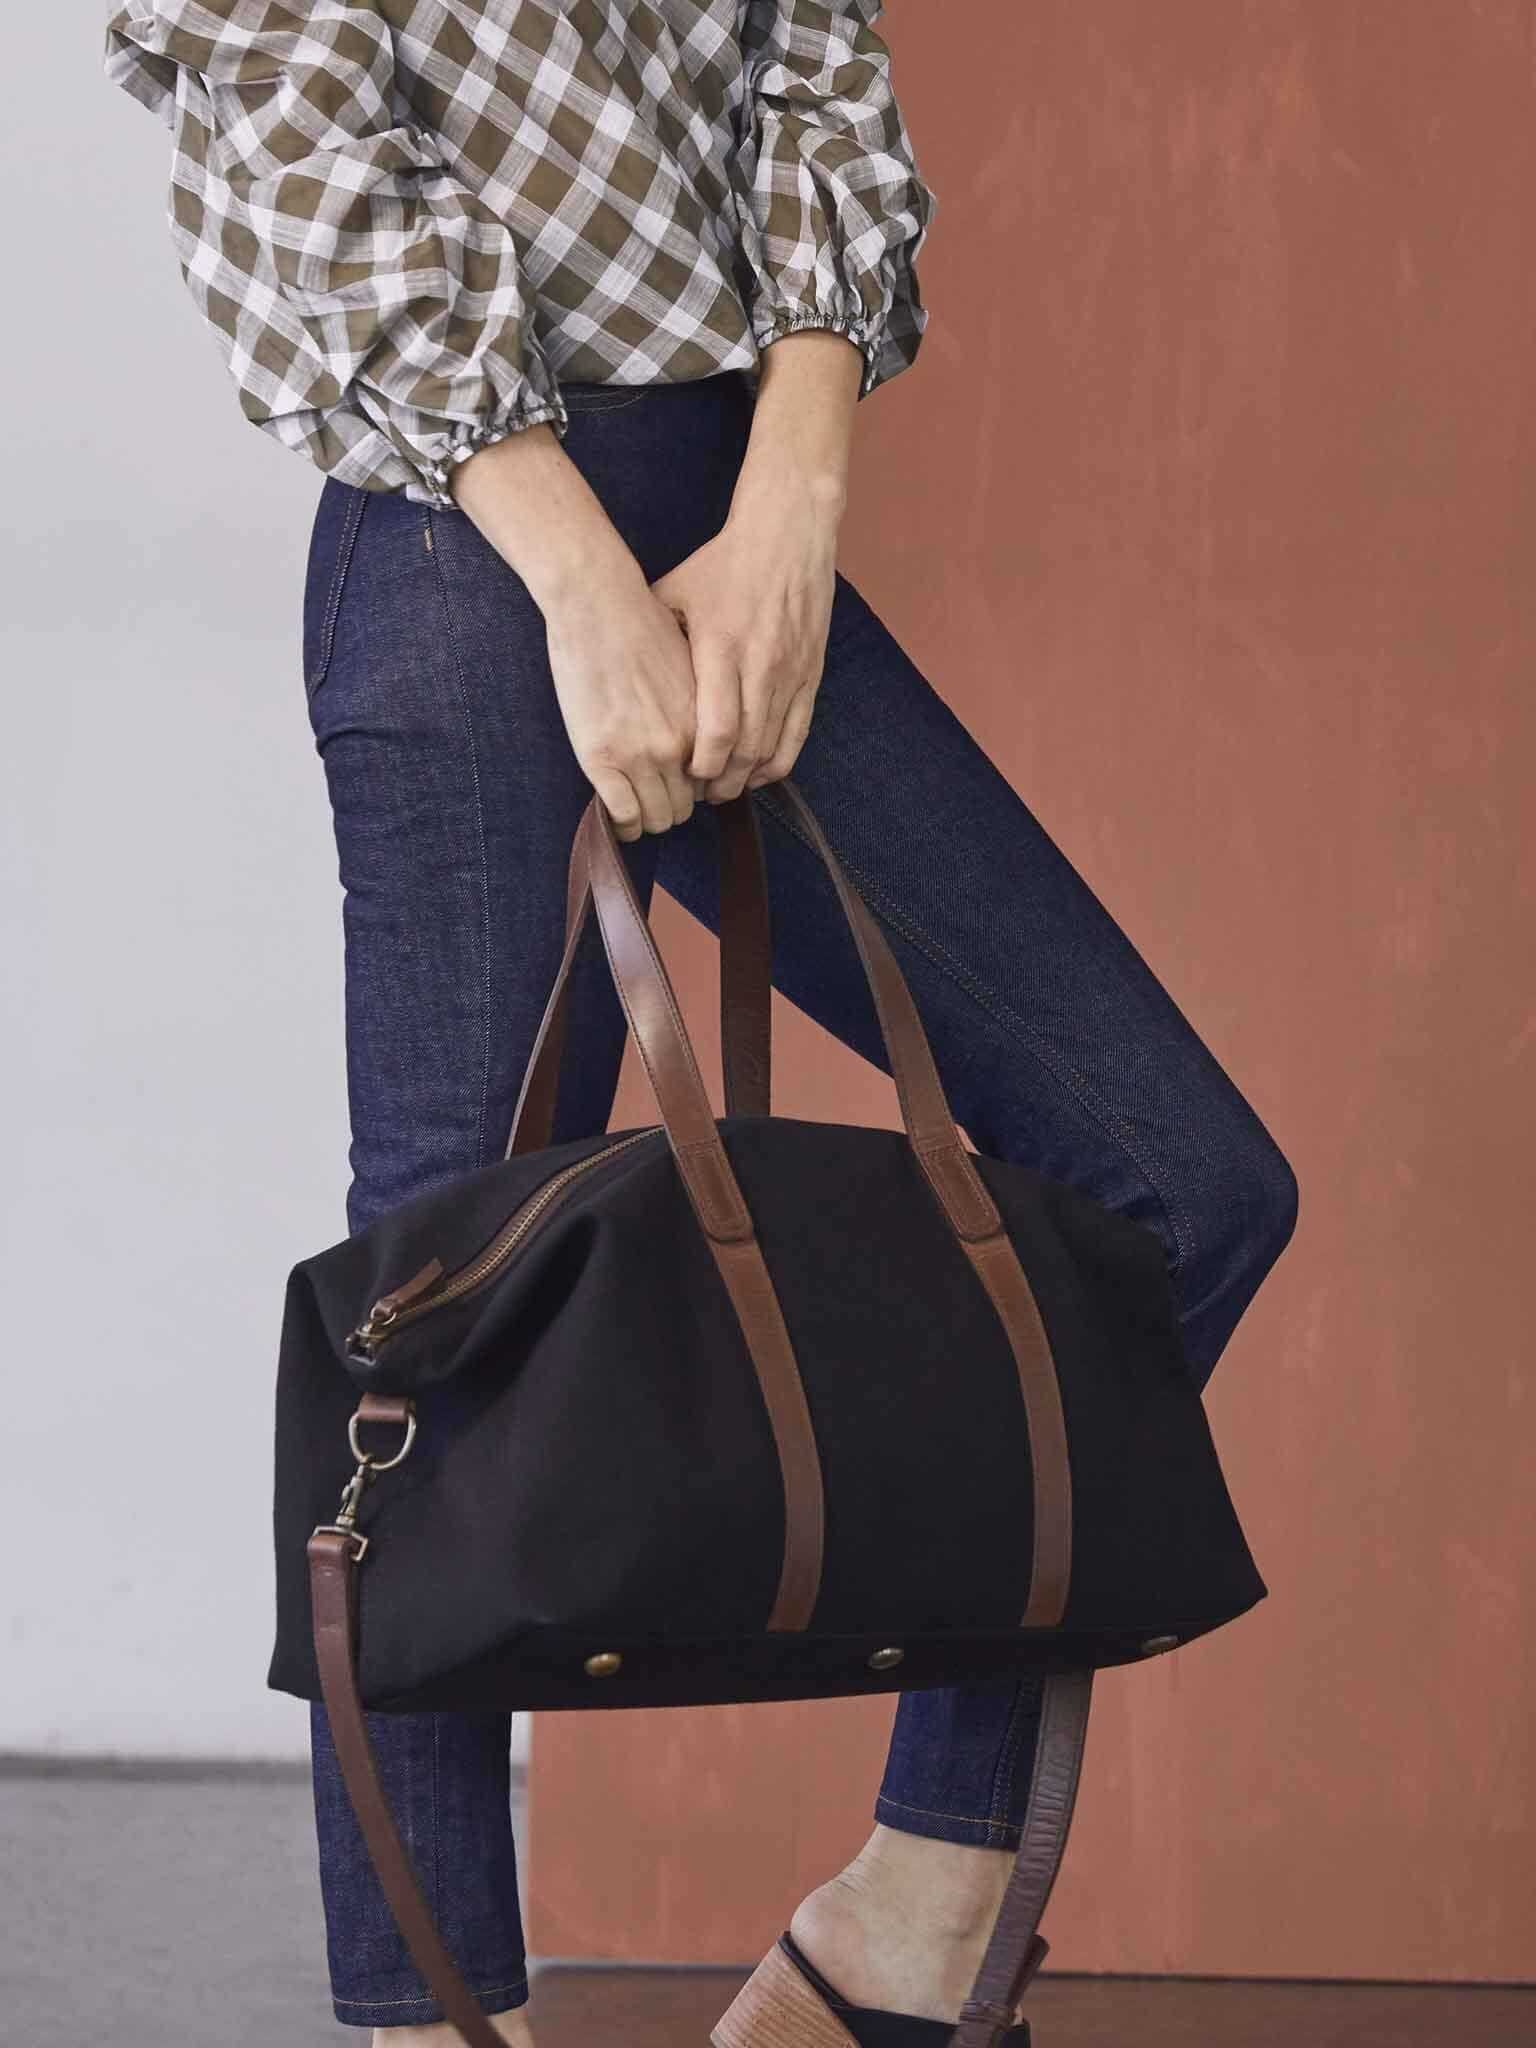 A woman holds a black and brown canvas weekender bag.